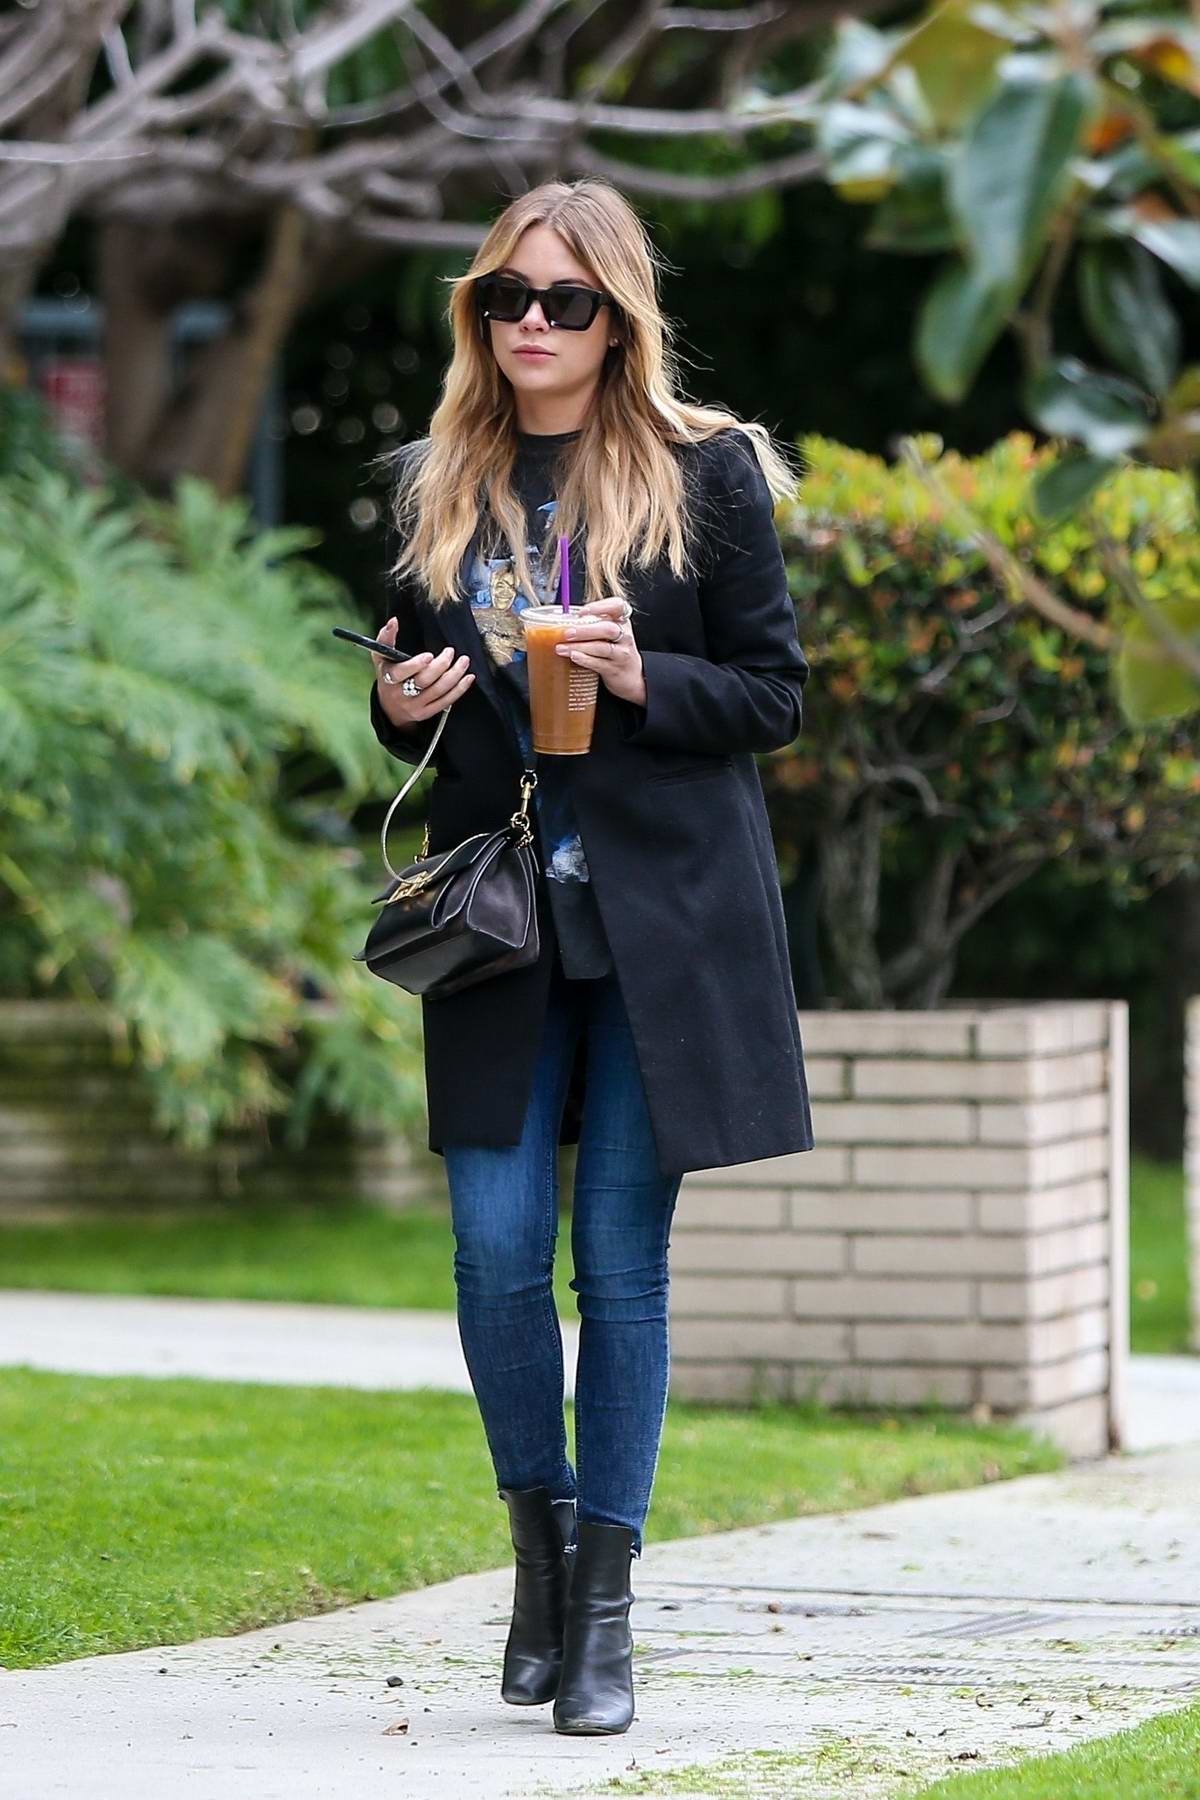 Ashley Benson enjoys an iced coffee on her way to the salon in Los Angeles